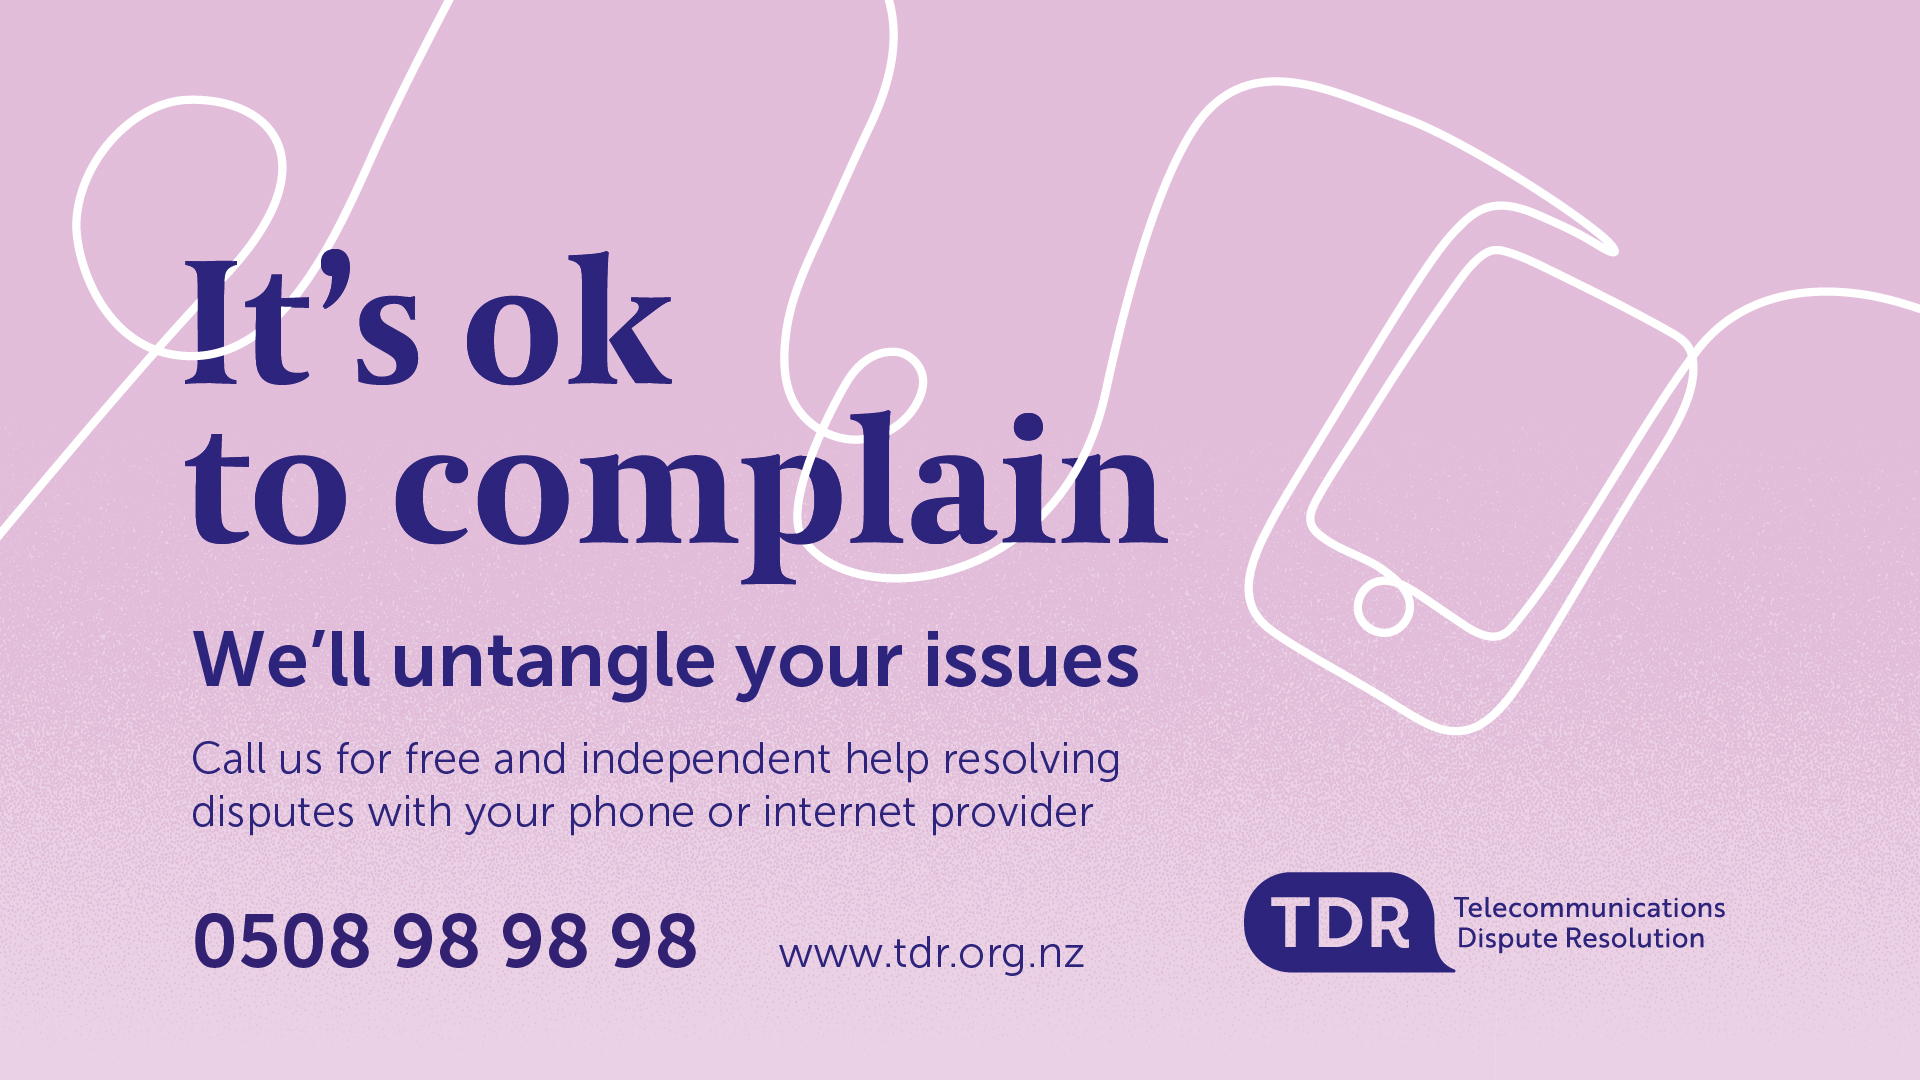 It's ok to complain - TDR ad static image